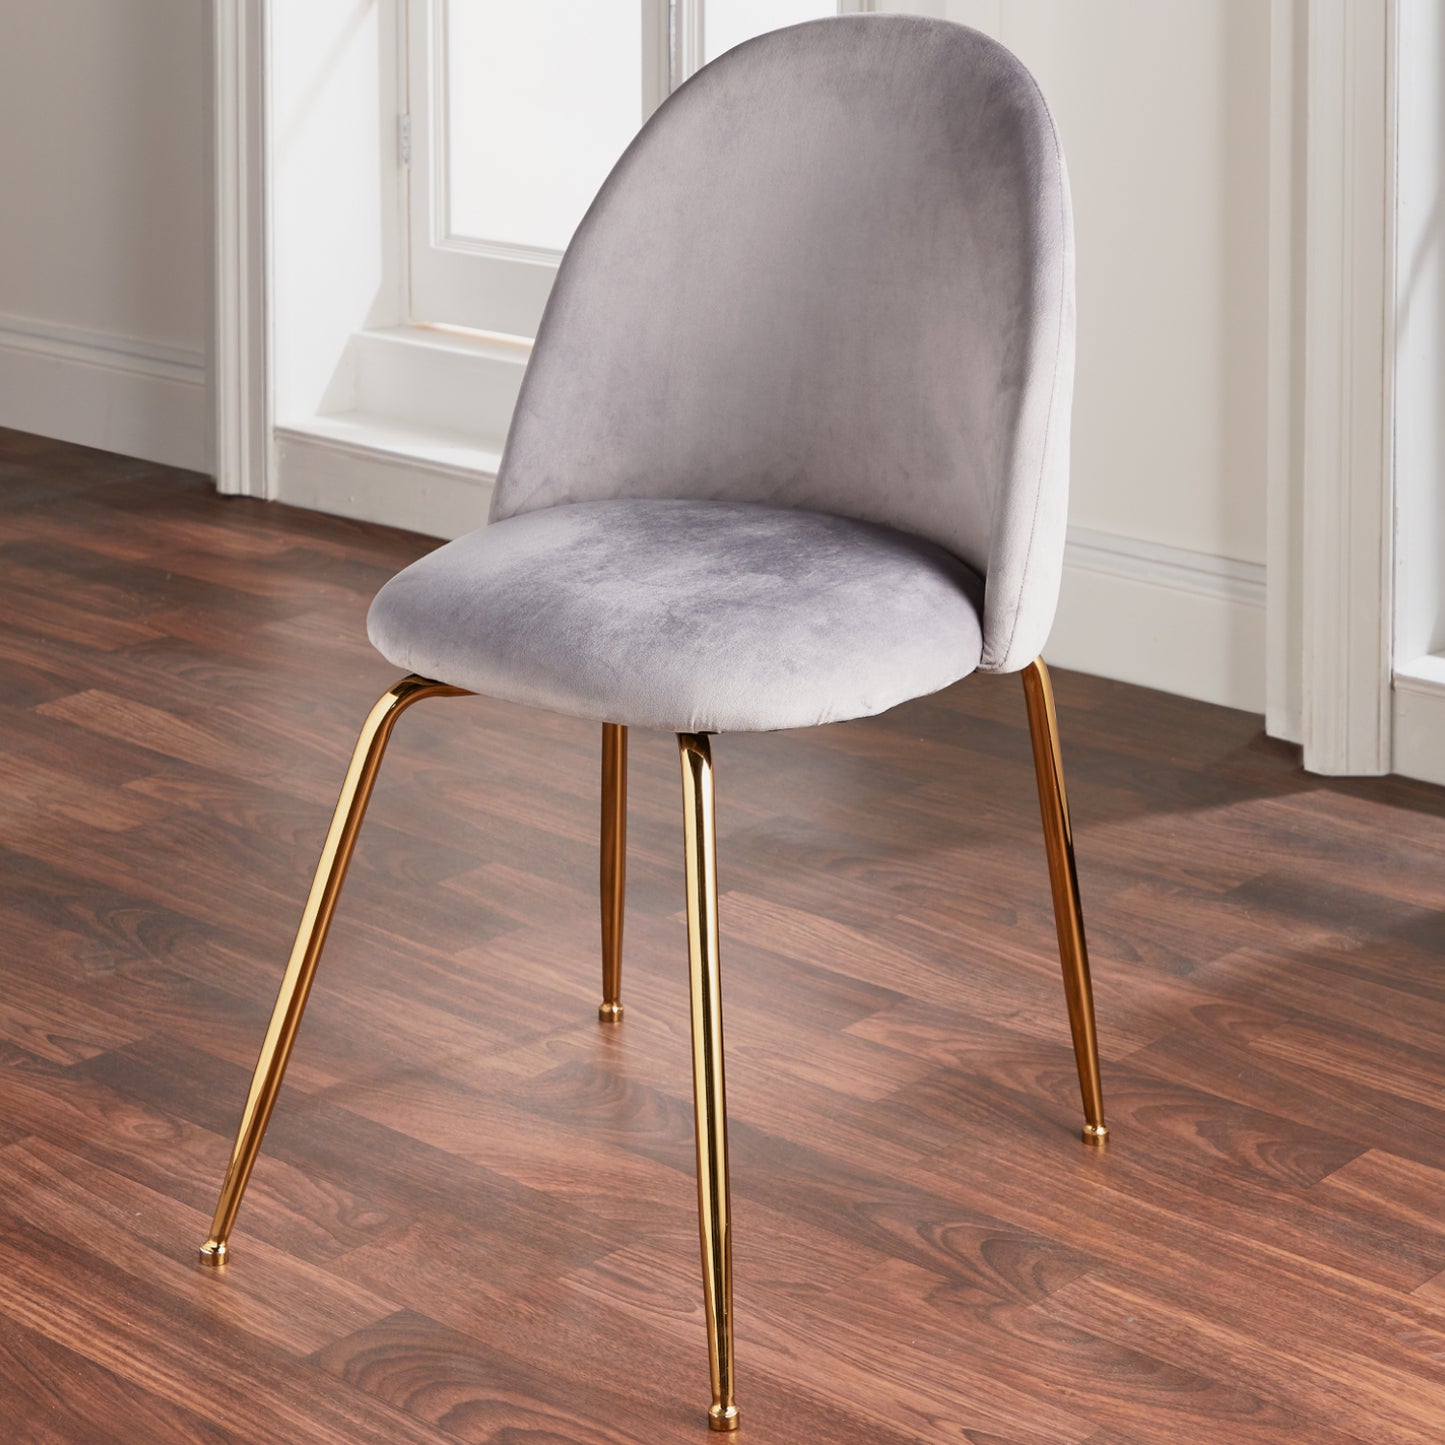 Set of 2 velvet dining chairs - gold legs by Native